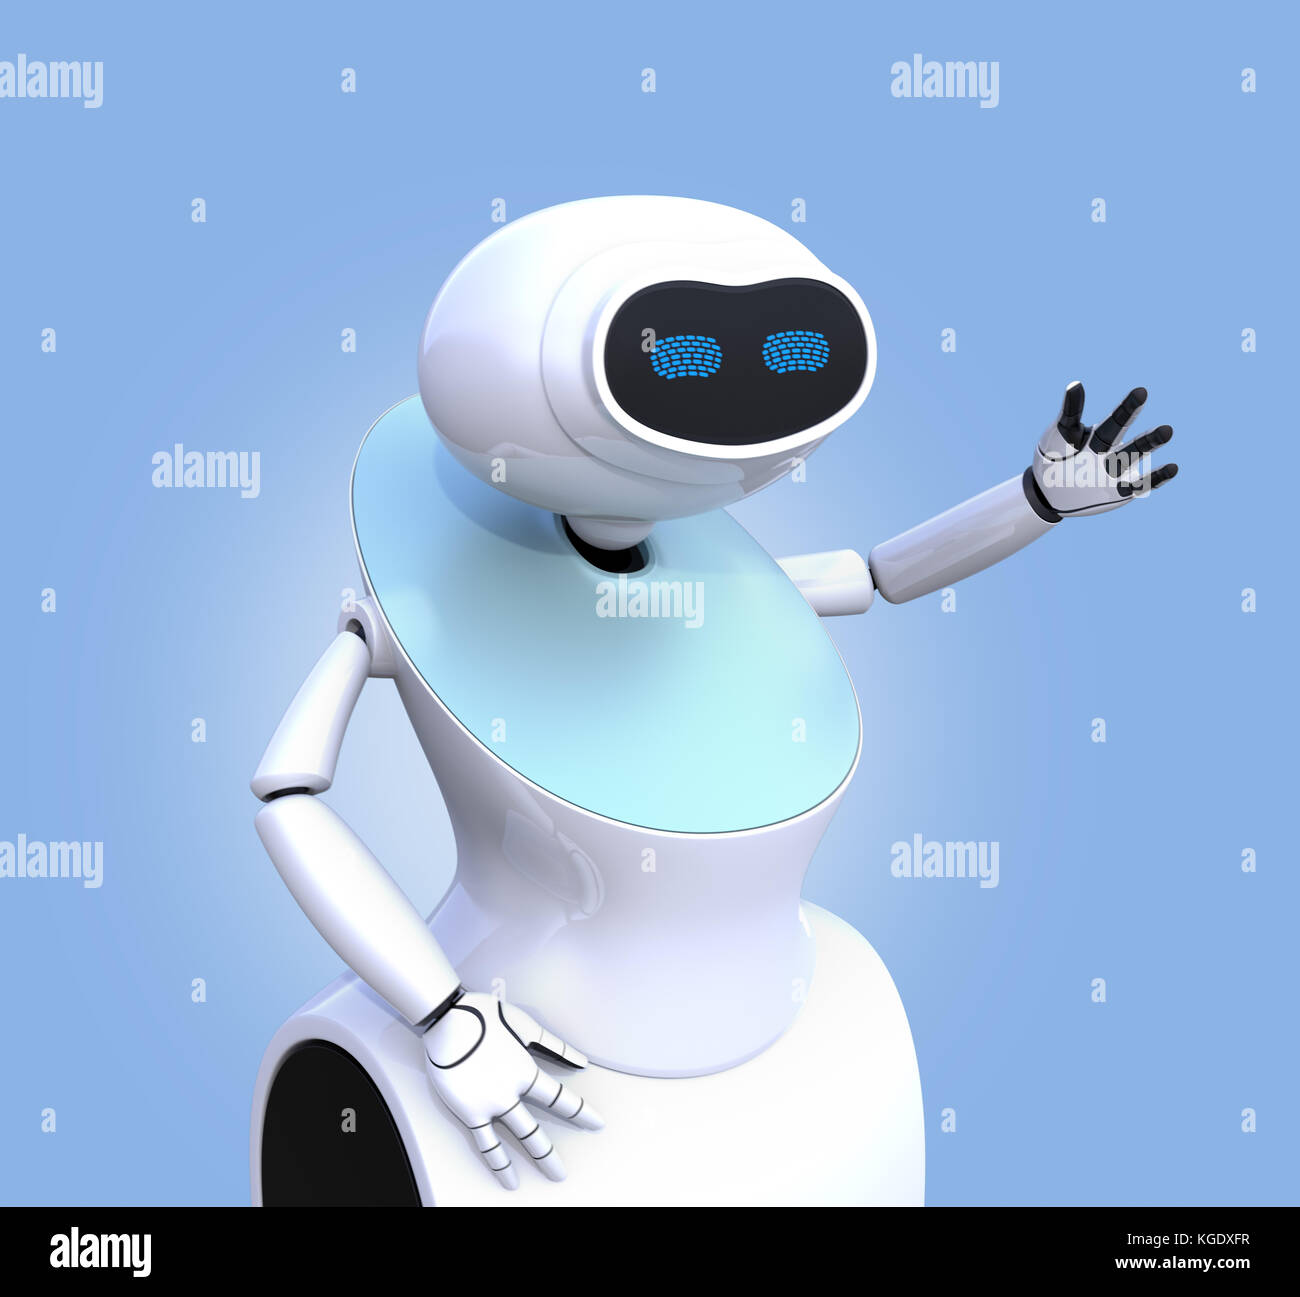 Humanoid robot isolated on blue background. 3D rendering image. Stock Photo